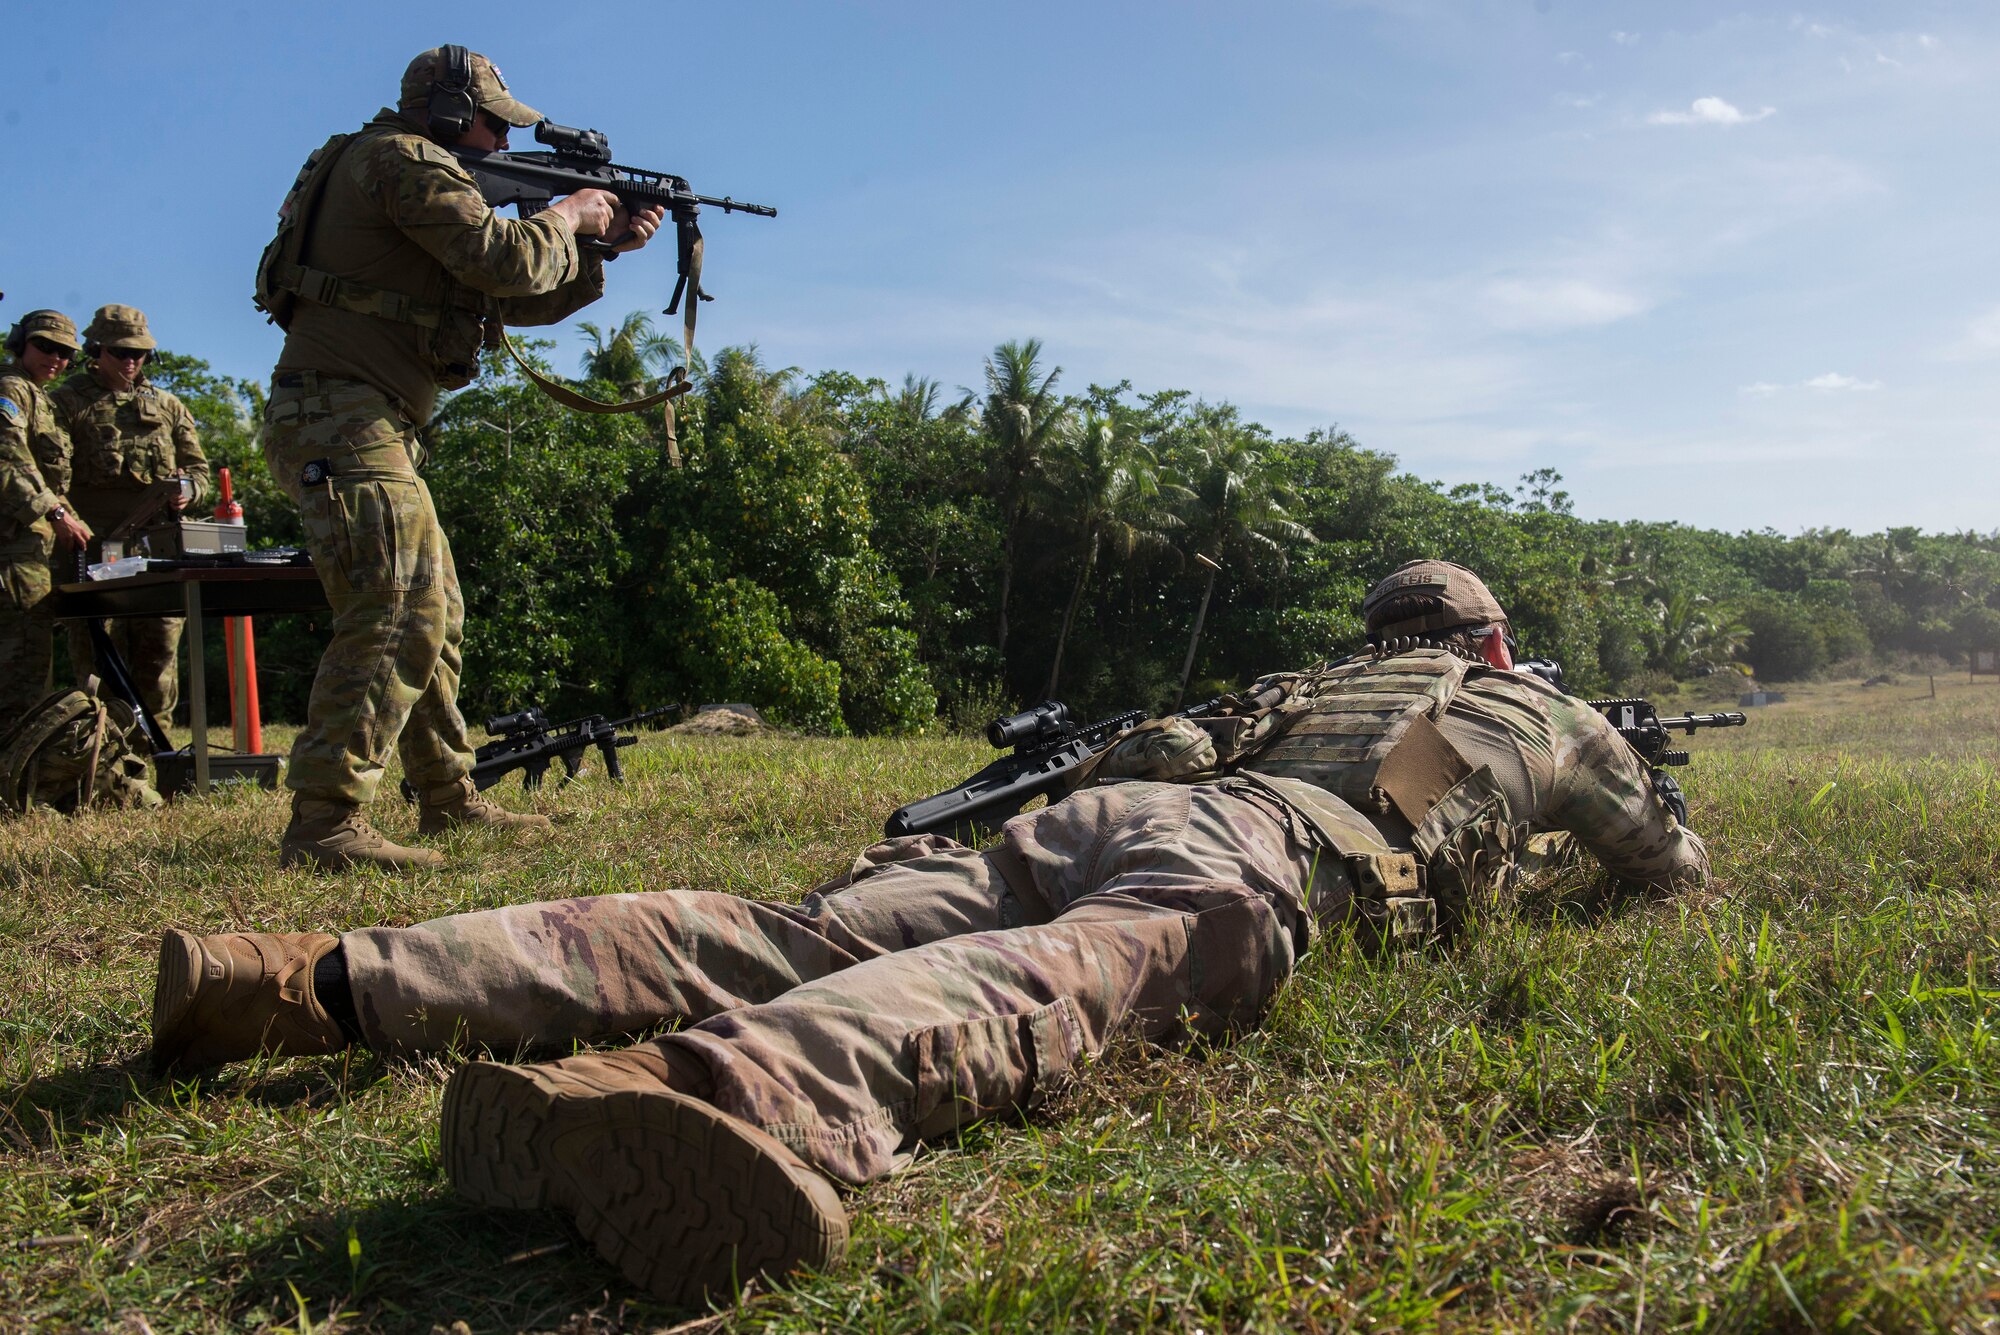 U.S. Air Force and Royal Australian Air Force (RAAF) personnel practice shooting the U.S. Air Force M4 assault rifle during Pacific Defender 20-1 at Andersen Air Force Base, Guam, Feb. 12, 2020.